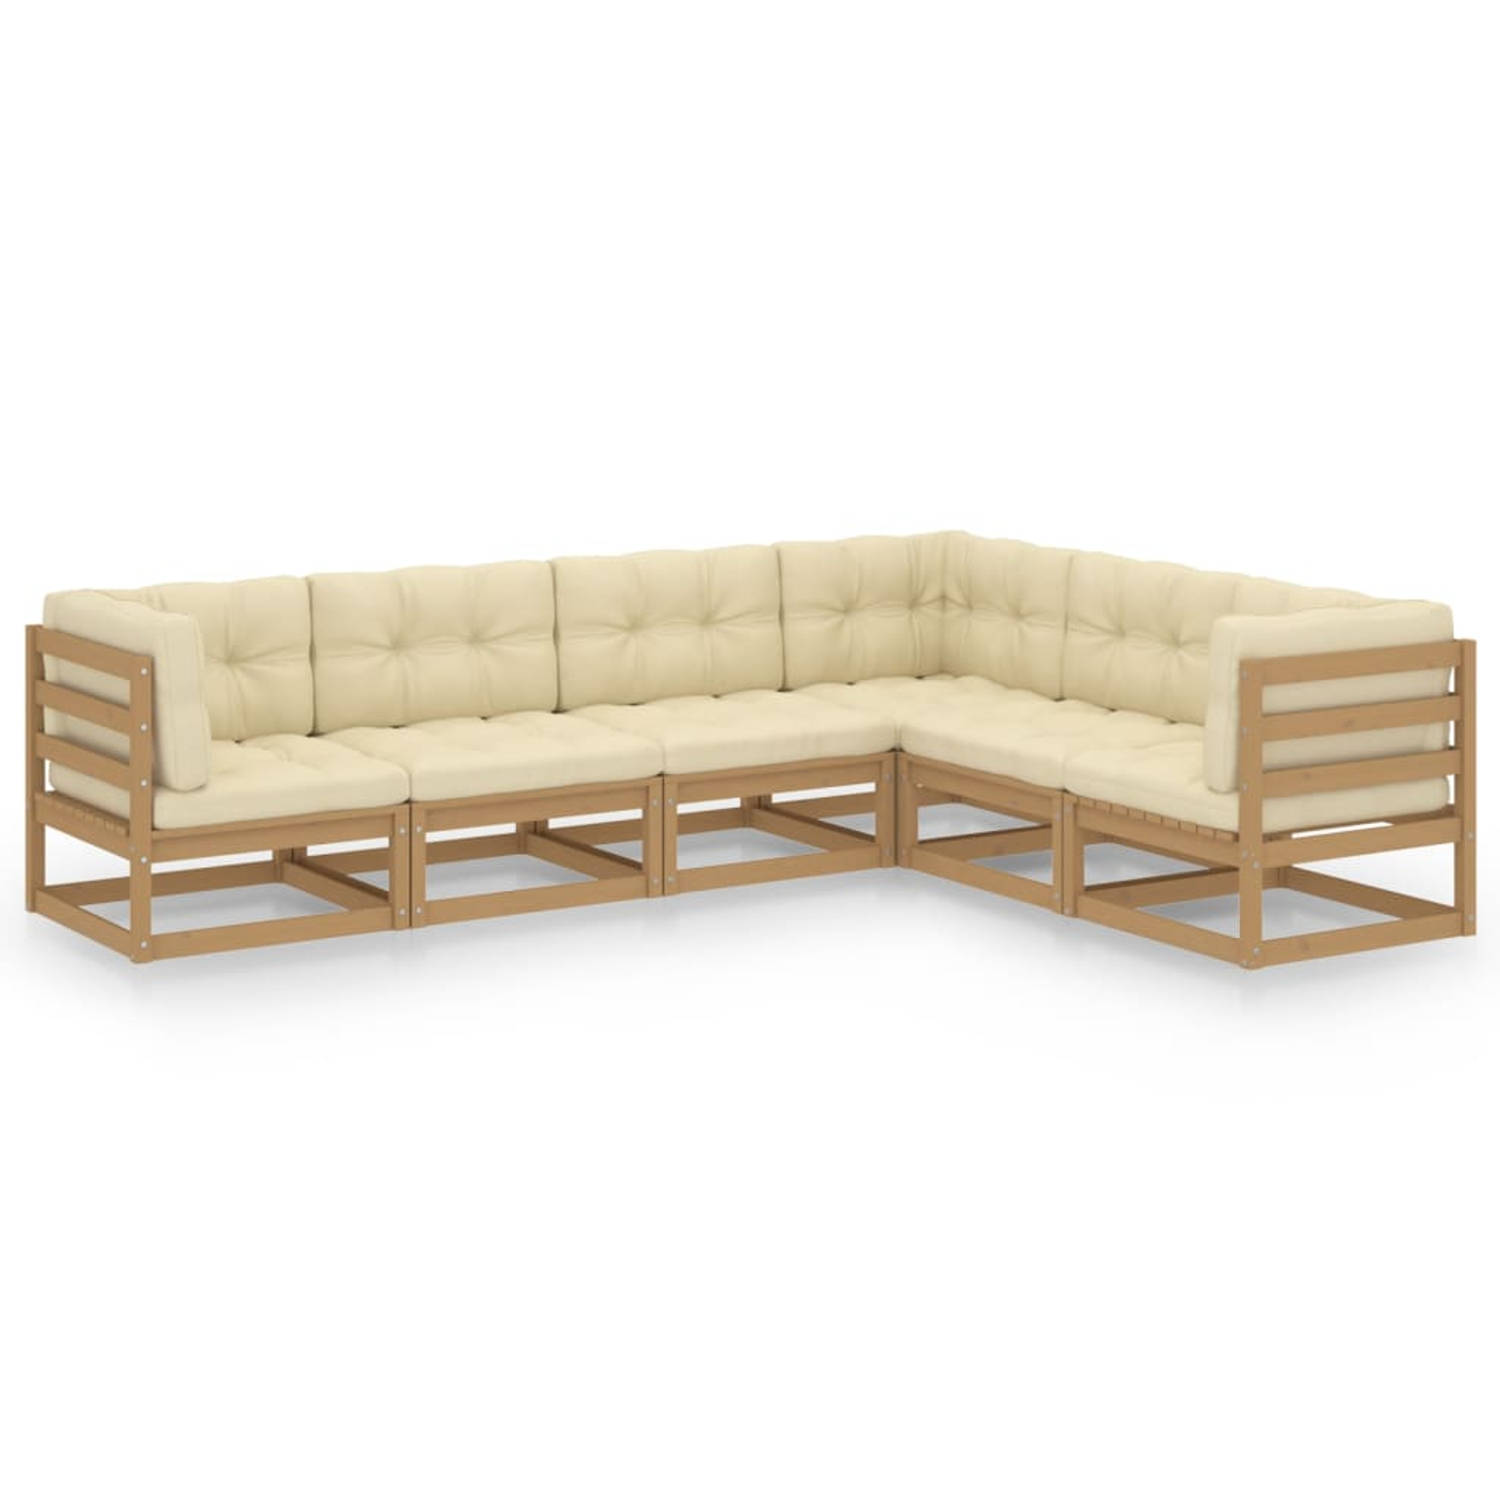 The Living Store Tuinset Grenenhout - Modulaire loungeset - Honingbruin - 70x70x67 cm - Inclusief kussens